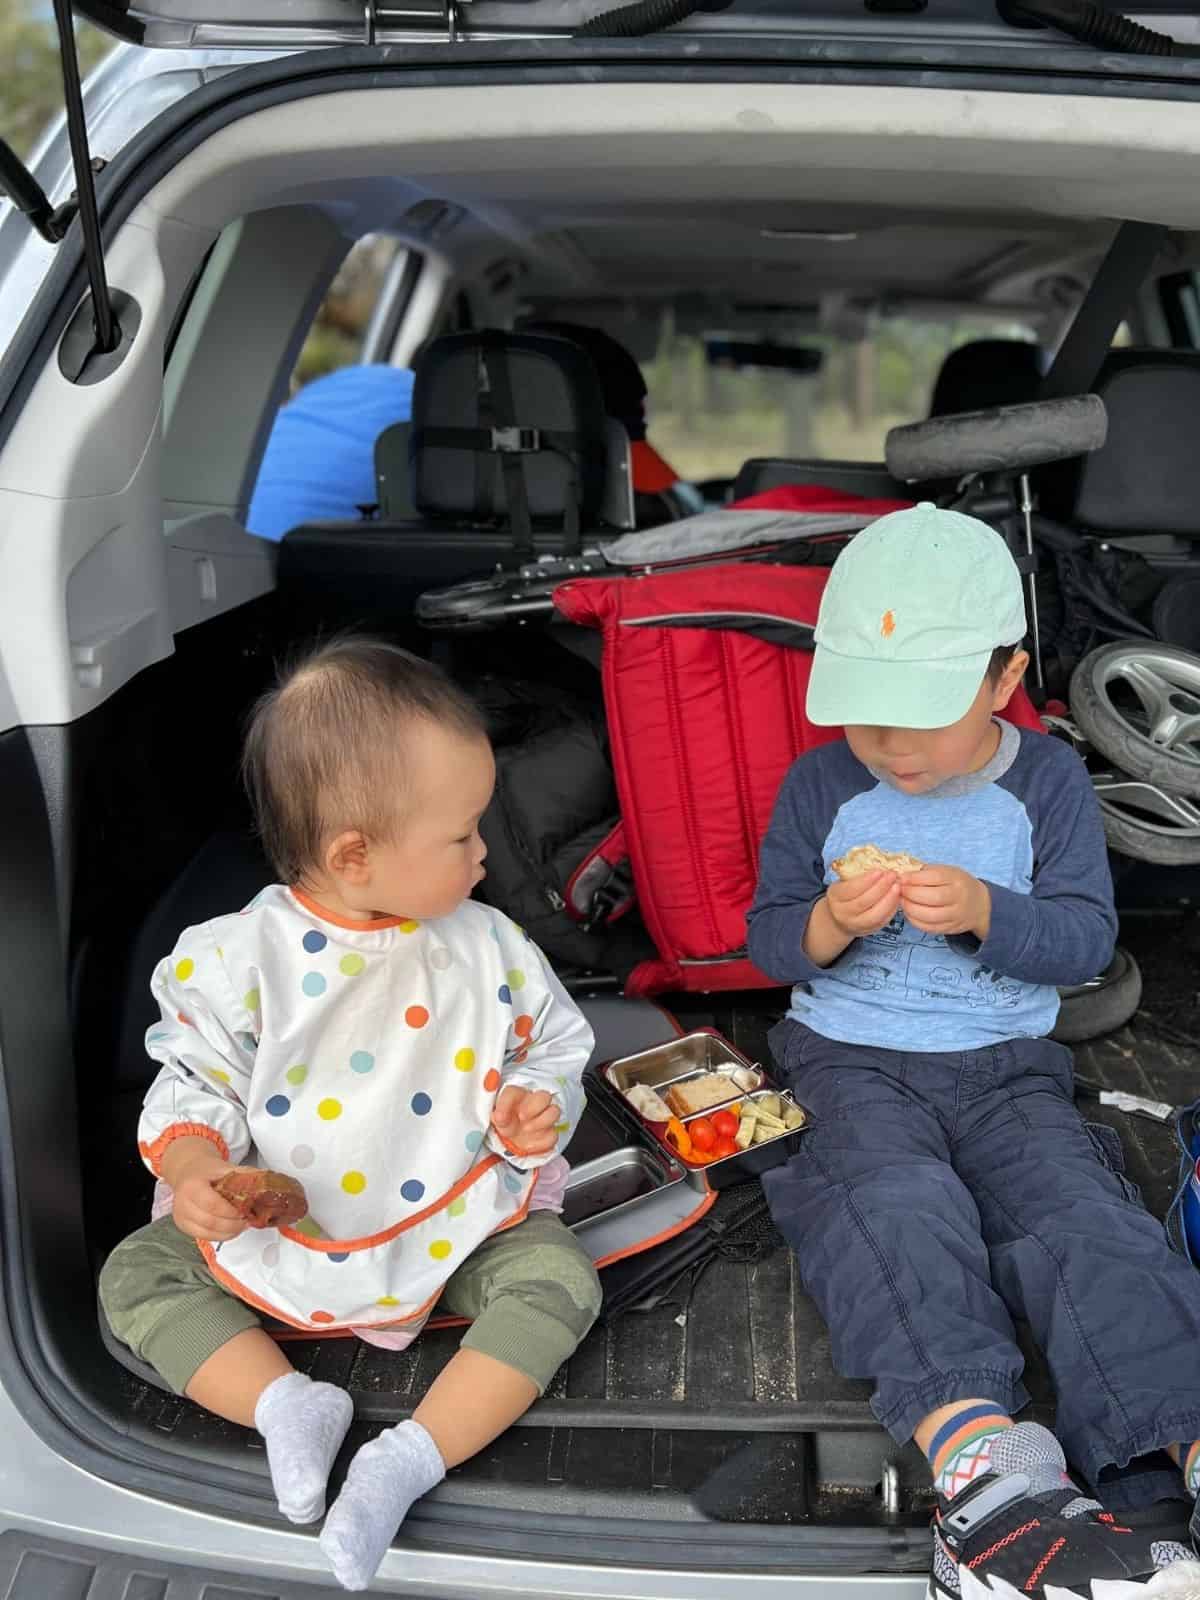 Two toddlers eating in the car trunk.